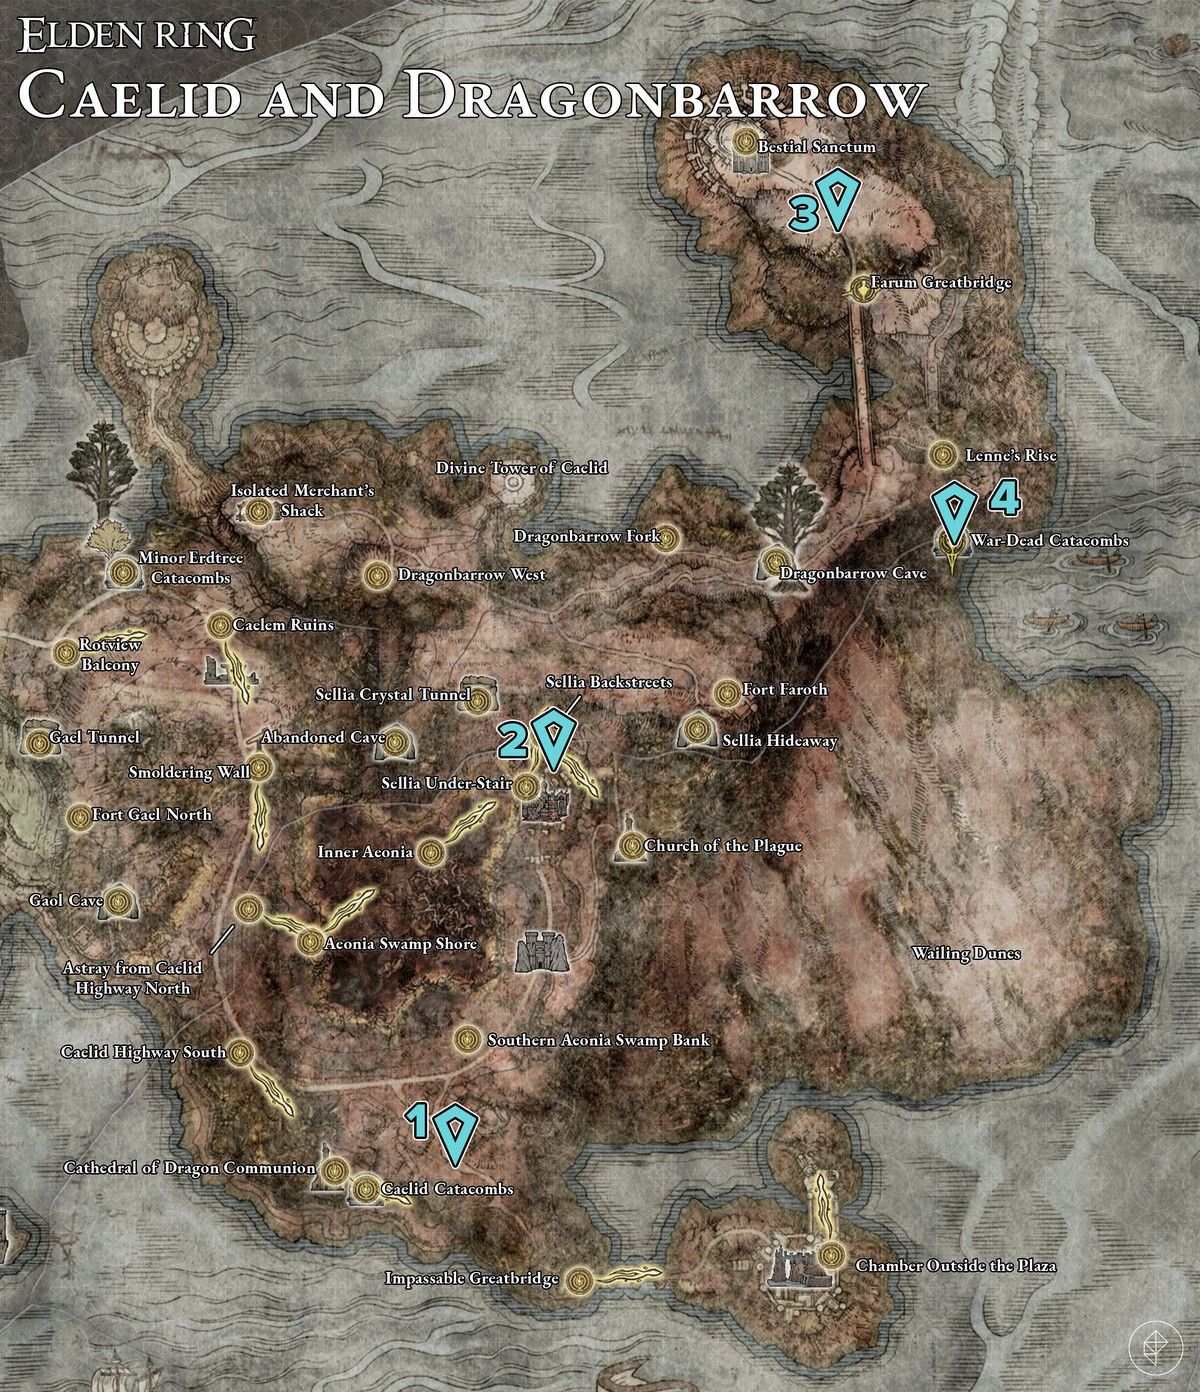 Map showing the Caelid and Dragonbarrow golden seed locations.